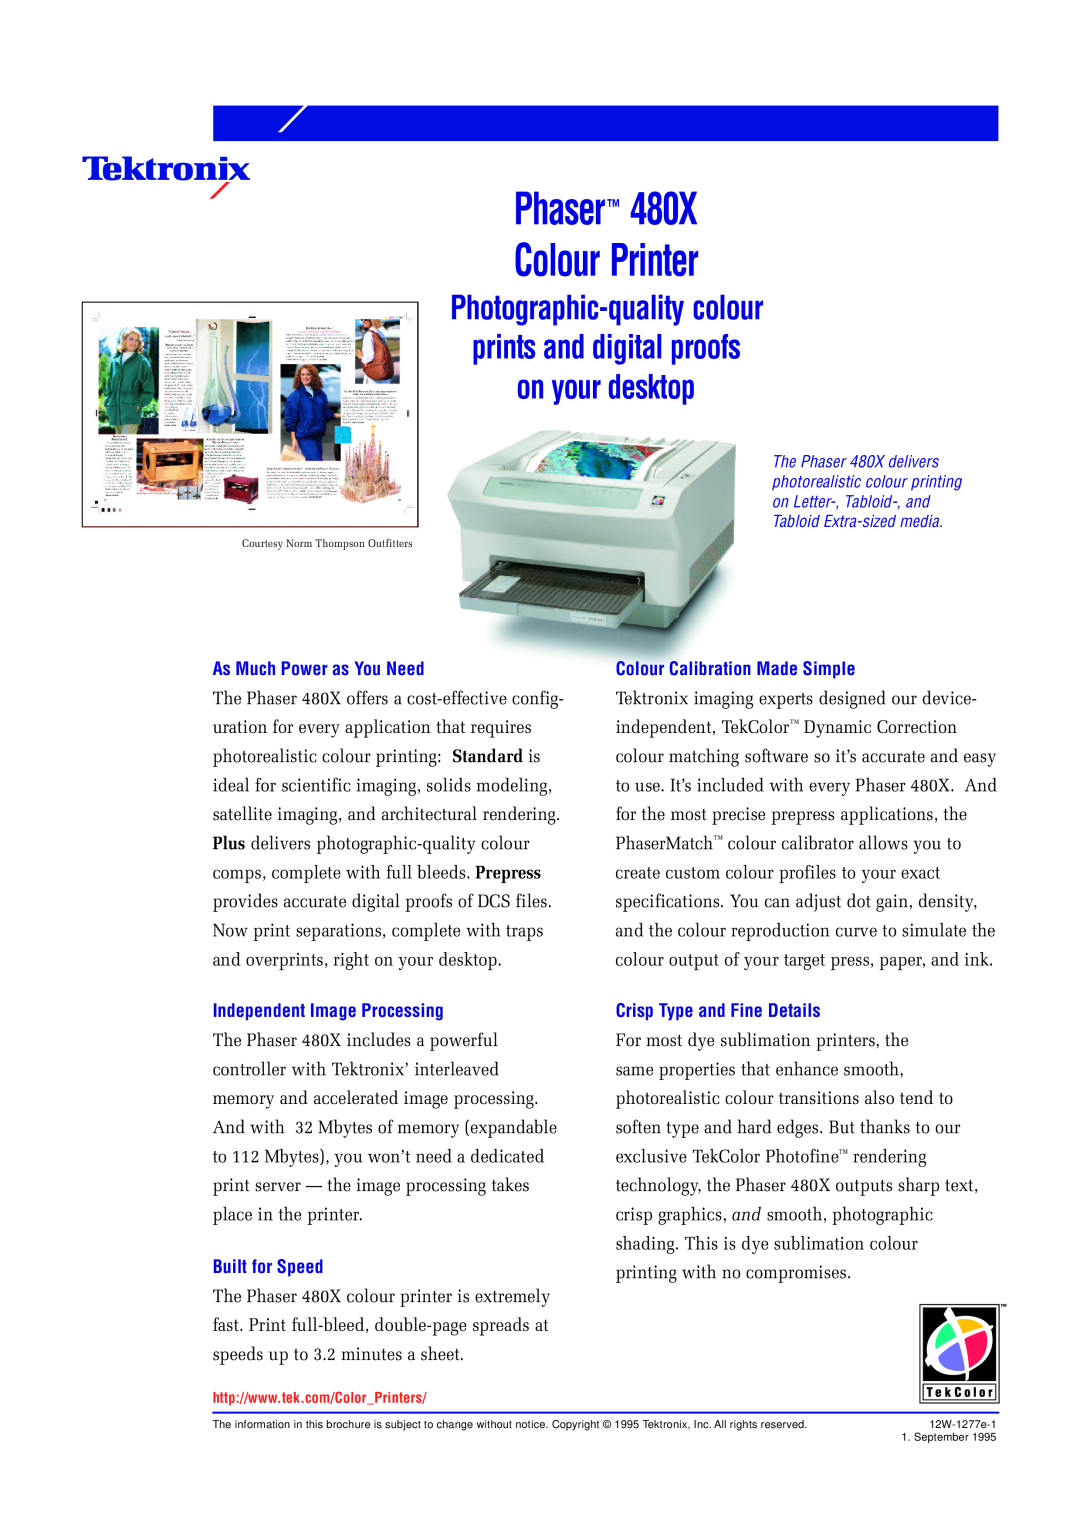 Xerox 480X brochure Photographic-qualitycolour, prints and digital proofs on your desktop, Phaser Colour Printer 